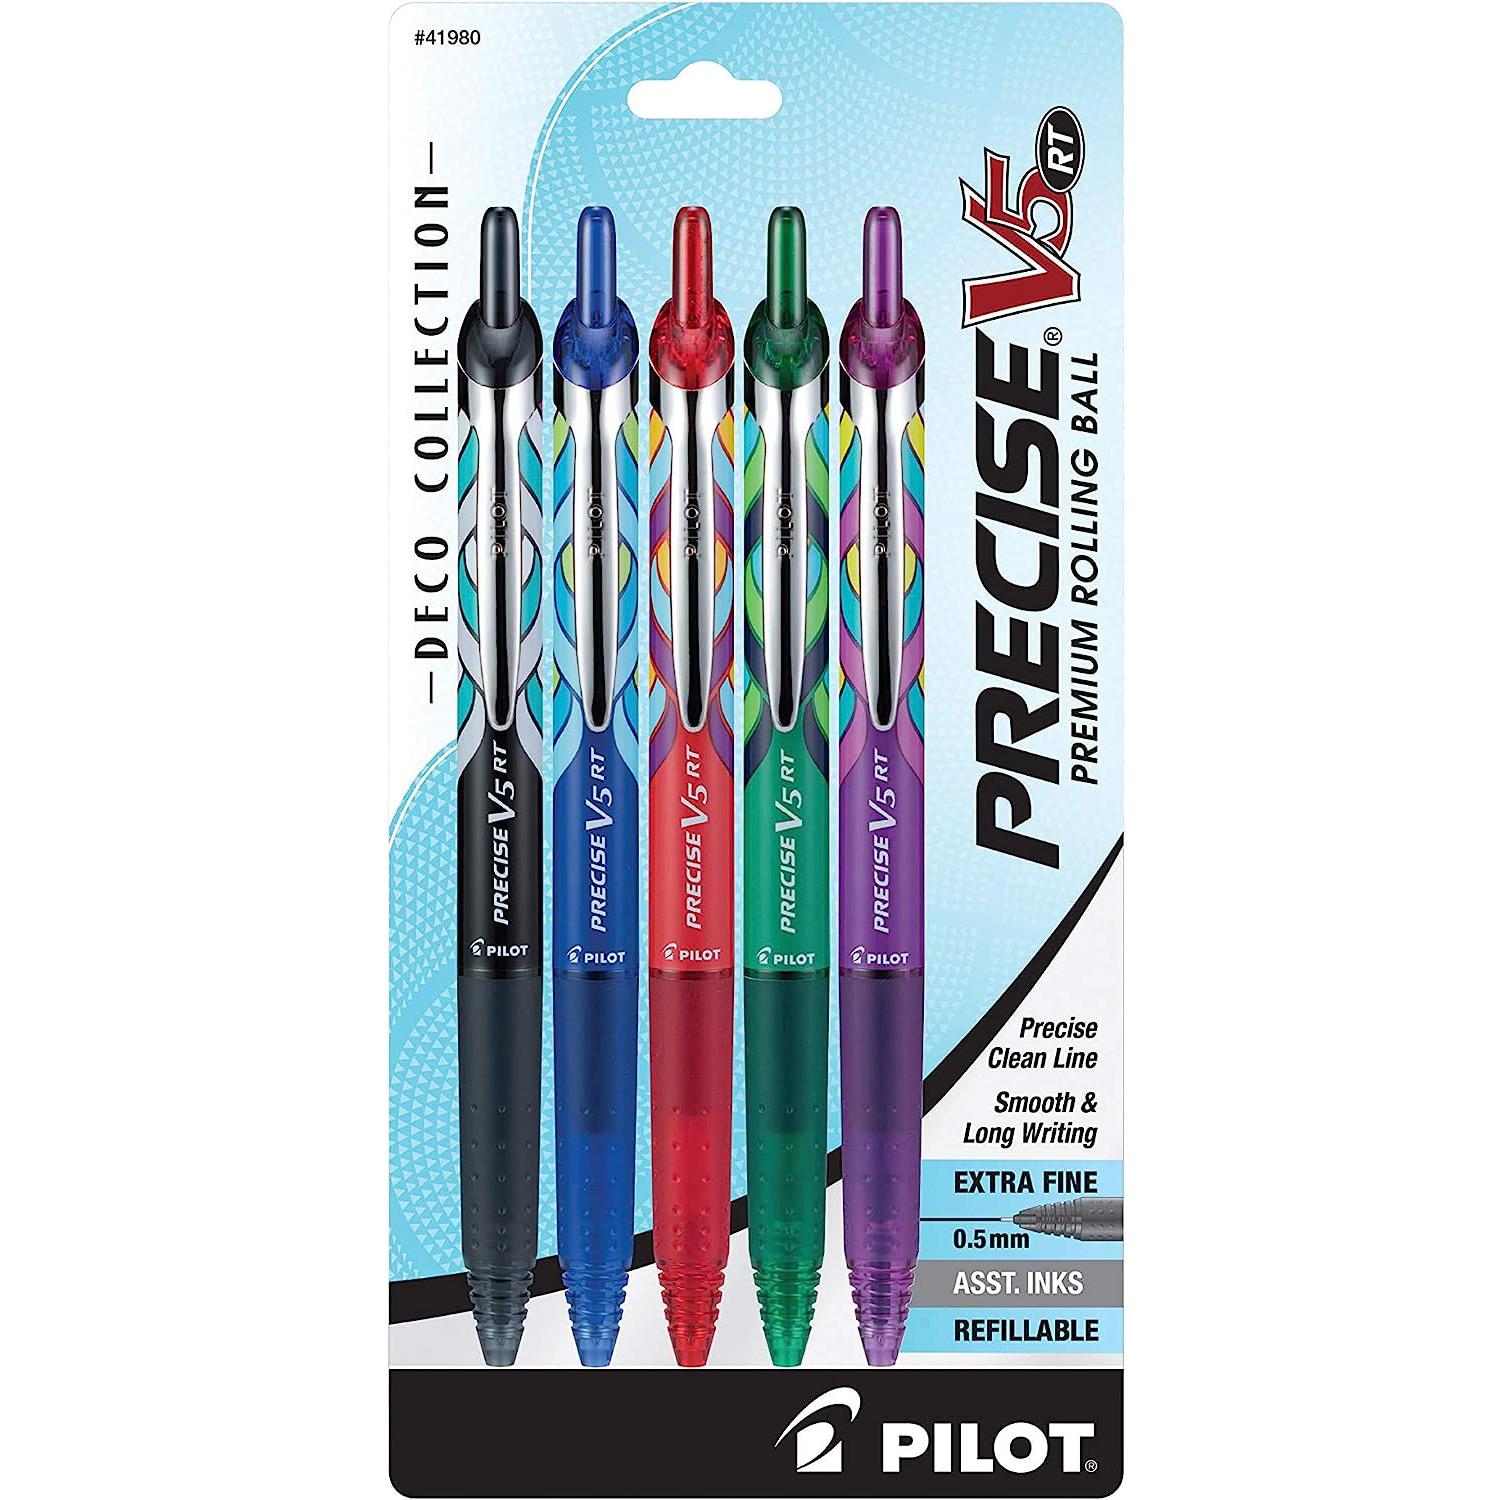 Pilot Precise V5 RT Deco Collection Refillable Ball Pens 5 Pack for $5.89